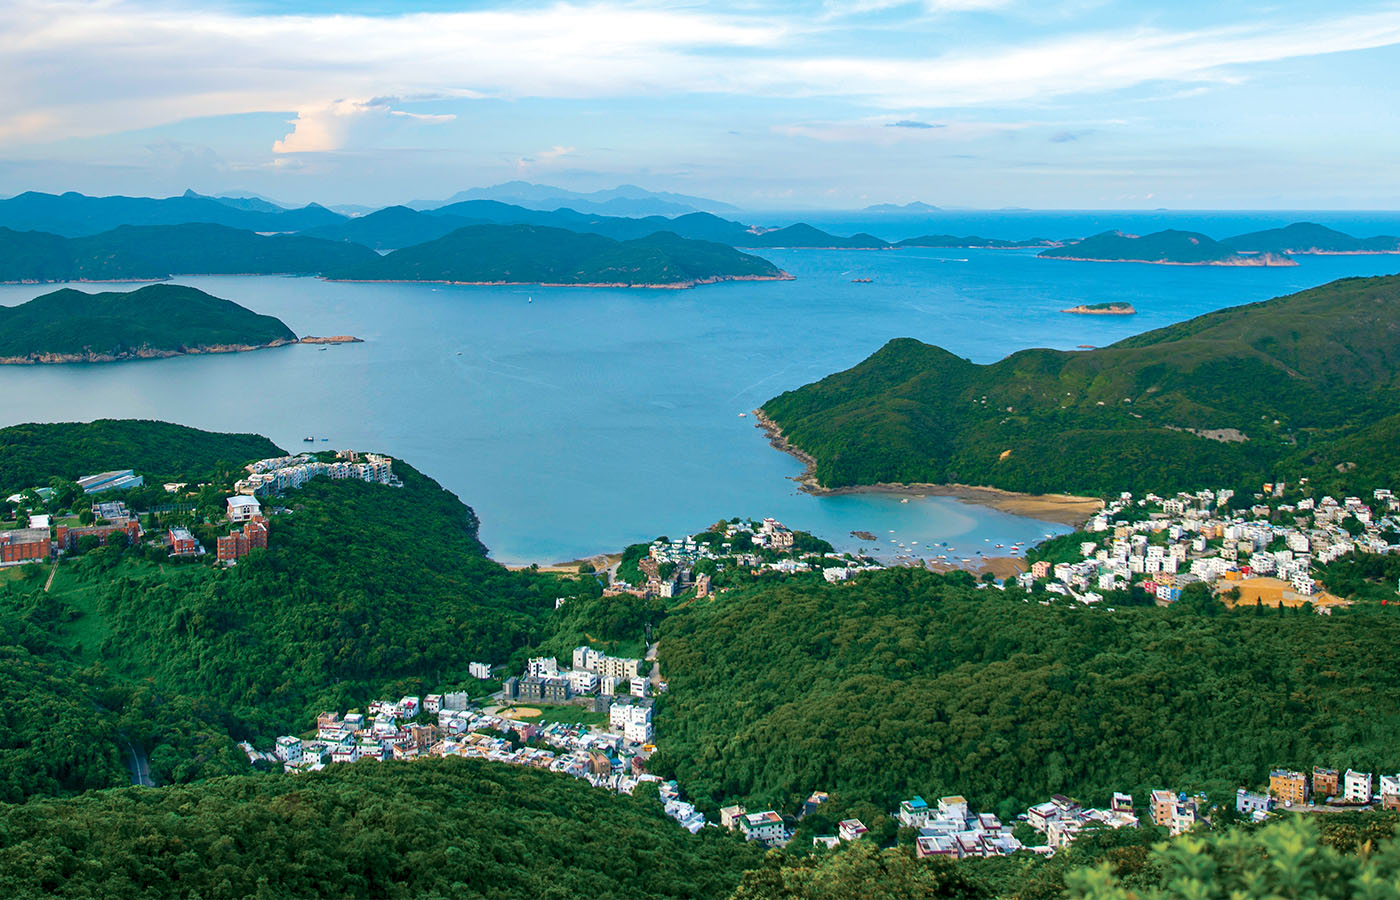 ISPSD 2023<br><small>The 35th International Symposium on Power Semiconductor Devices and ICs<br> 28 May - 1 June 2023<br> Shaw Auditorium, HKUST, Hong Kong</small>